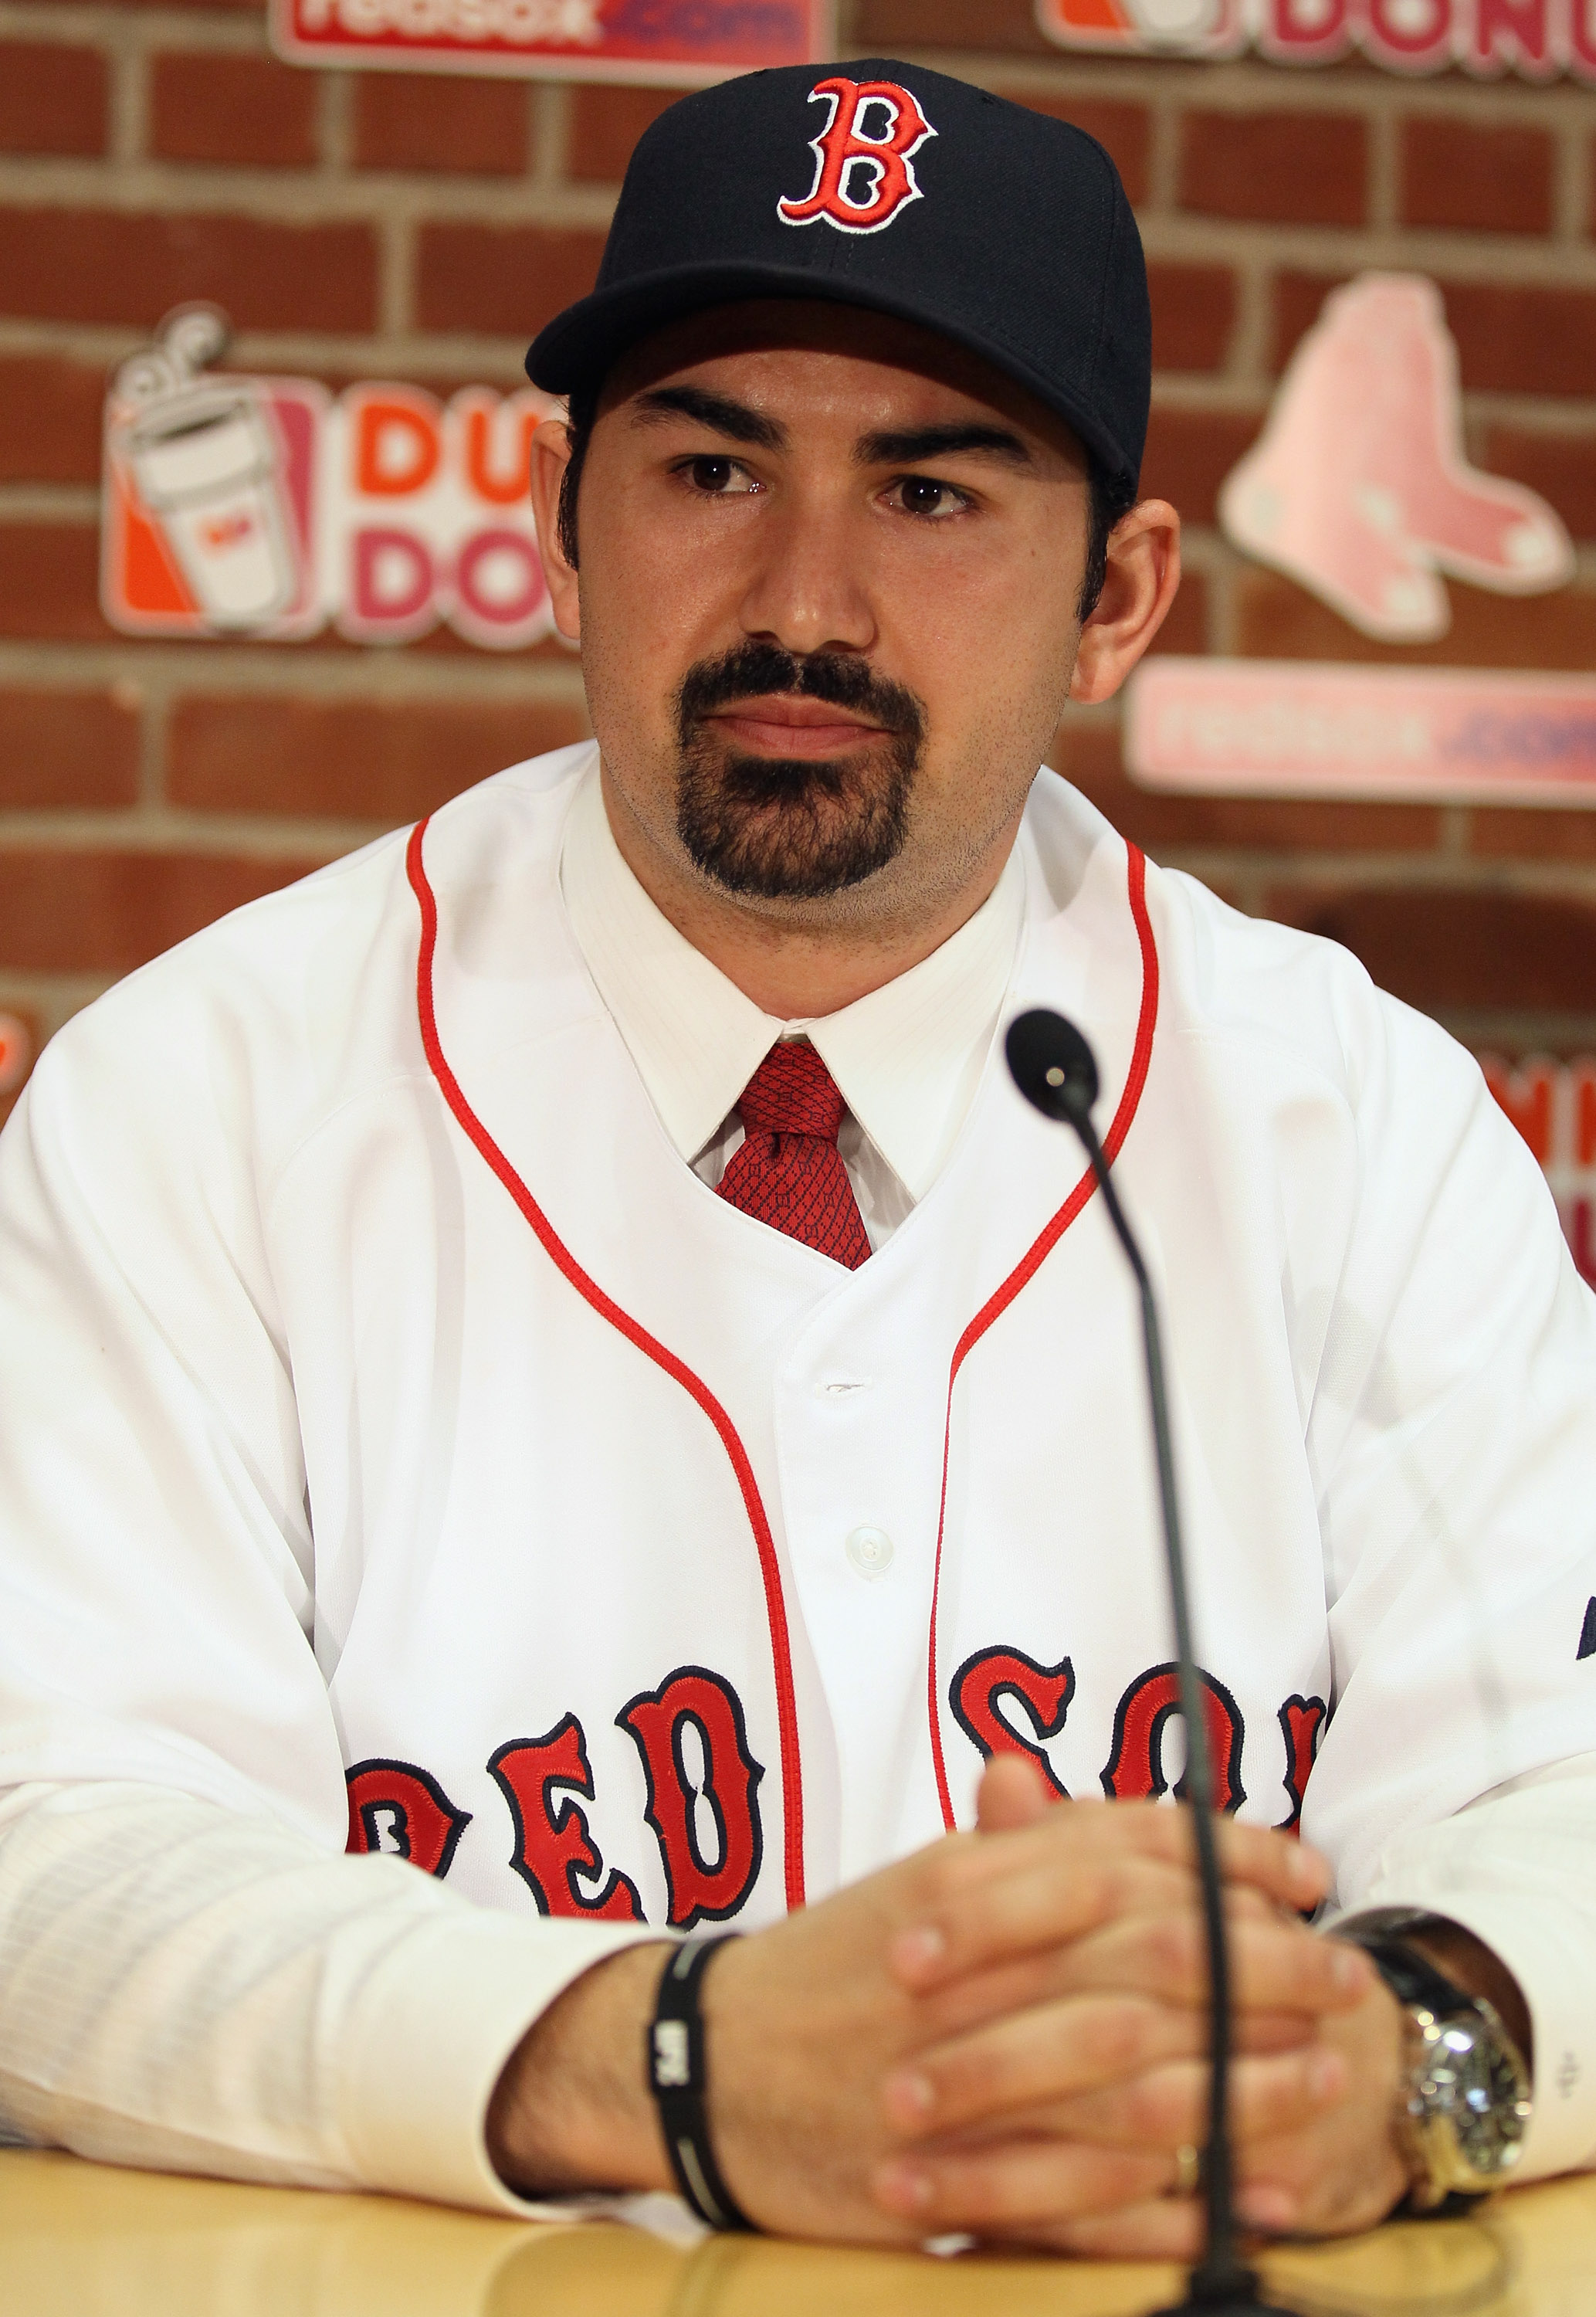 BOSTON, MA - DECEMBER 06:  Adrian Gonzalez answers questions during a press conference to announce his signing with the Boston Red Sox on December 6,  2010 at Fenway Park in Boston, Massachusetts.  (Photo by Elsa/Getty Images)